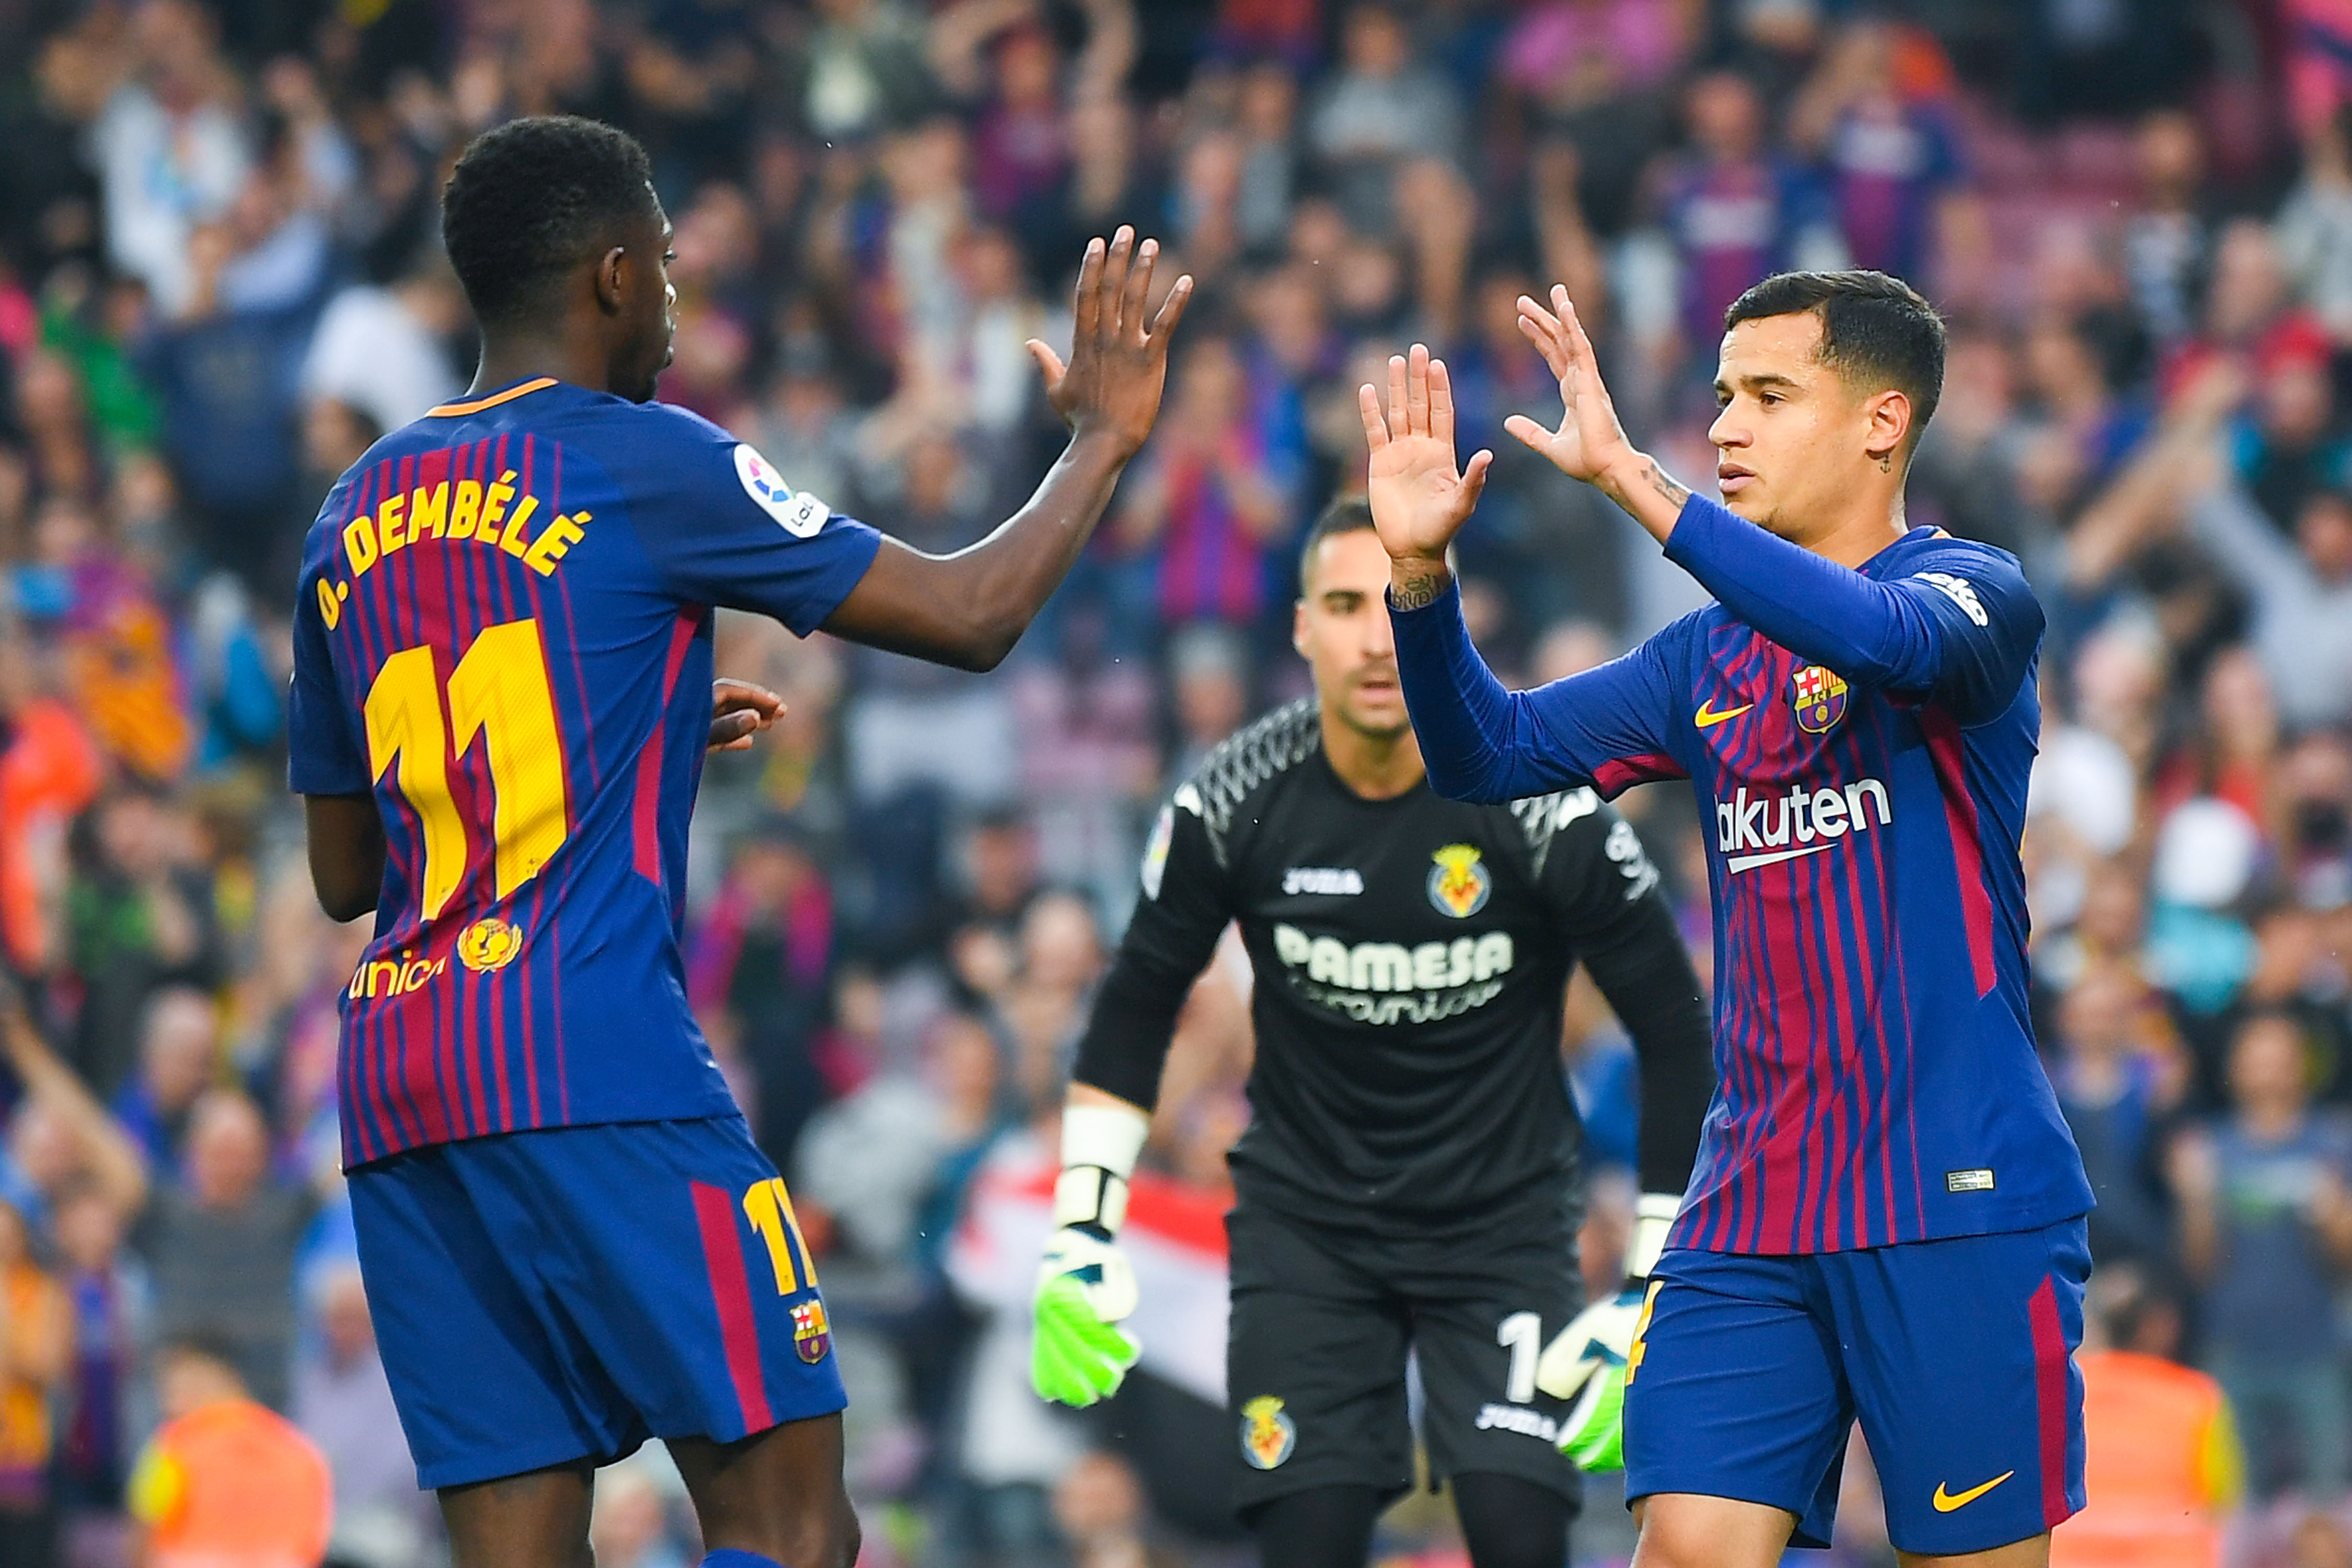 BARCELONA, SPAIN - MAY 09:  Philippe Coutinho (R) of FC Barcelona celebrates with his team mate Oussame Dembele after scoring his team's first goal the La Liga match between Barcelona and Real Madrid at Camp Nou on May 9, 2018 in Barcelona, Spain.  (Photo by David Ramos/Getty Images)